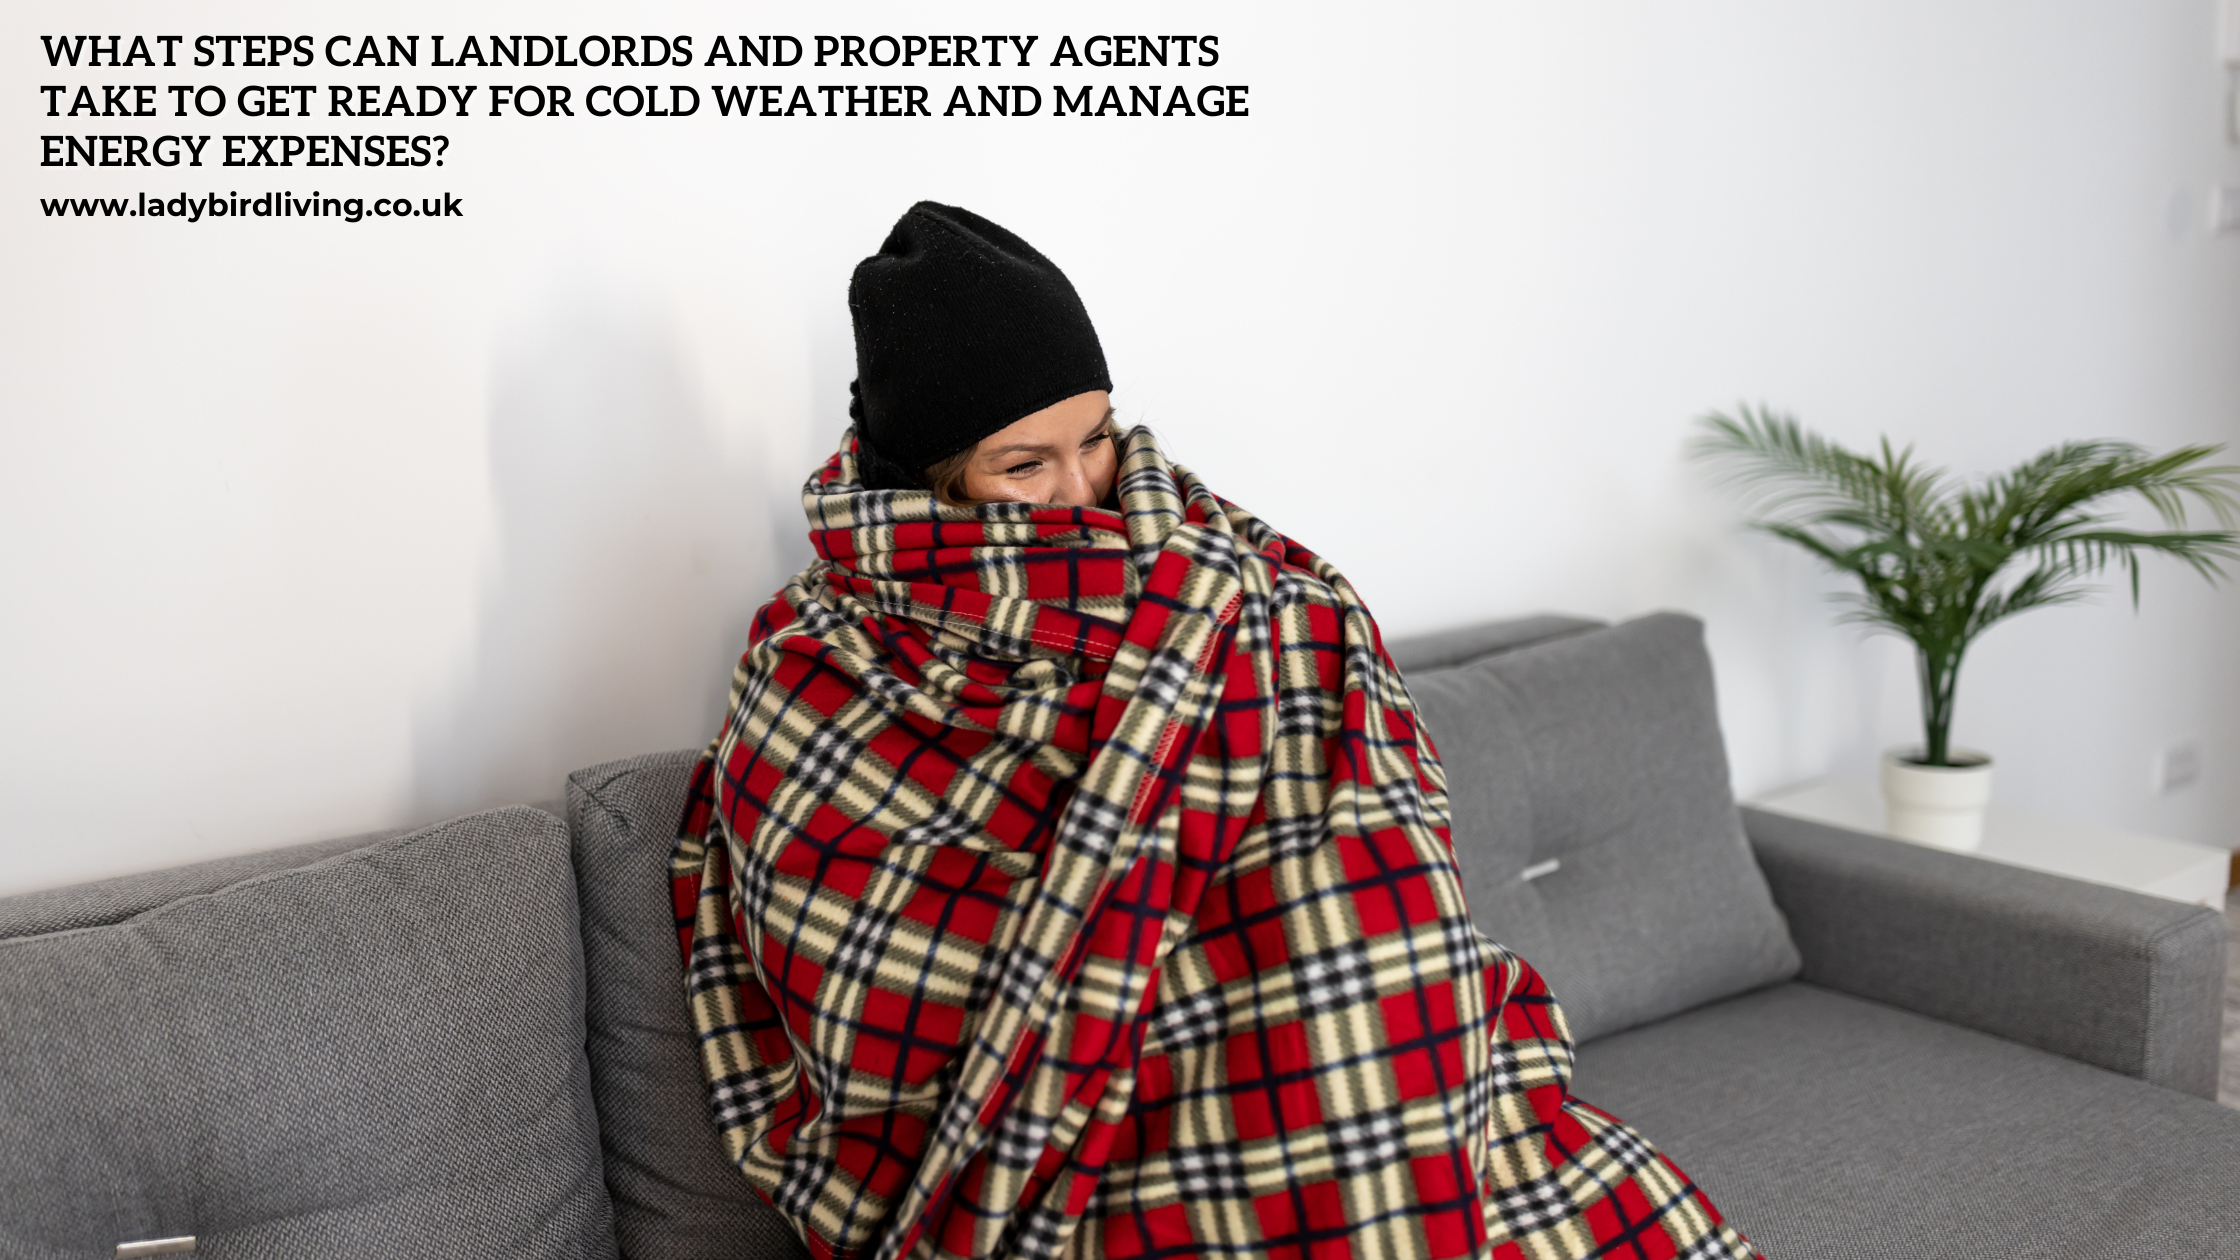 What steps can landlords and property agents take to get ready for cold weather and manage energy expenses